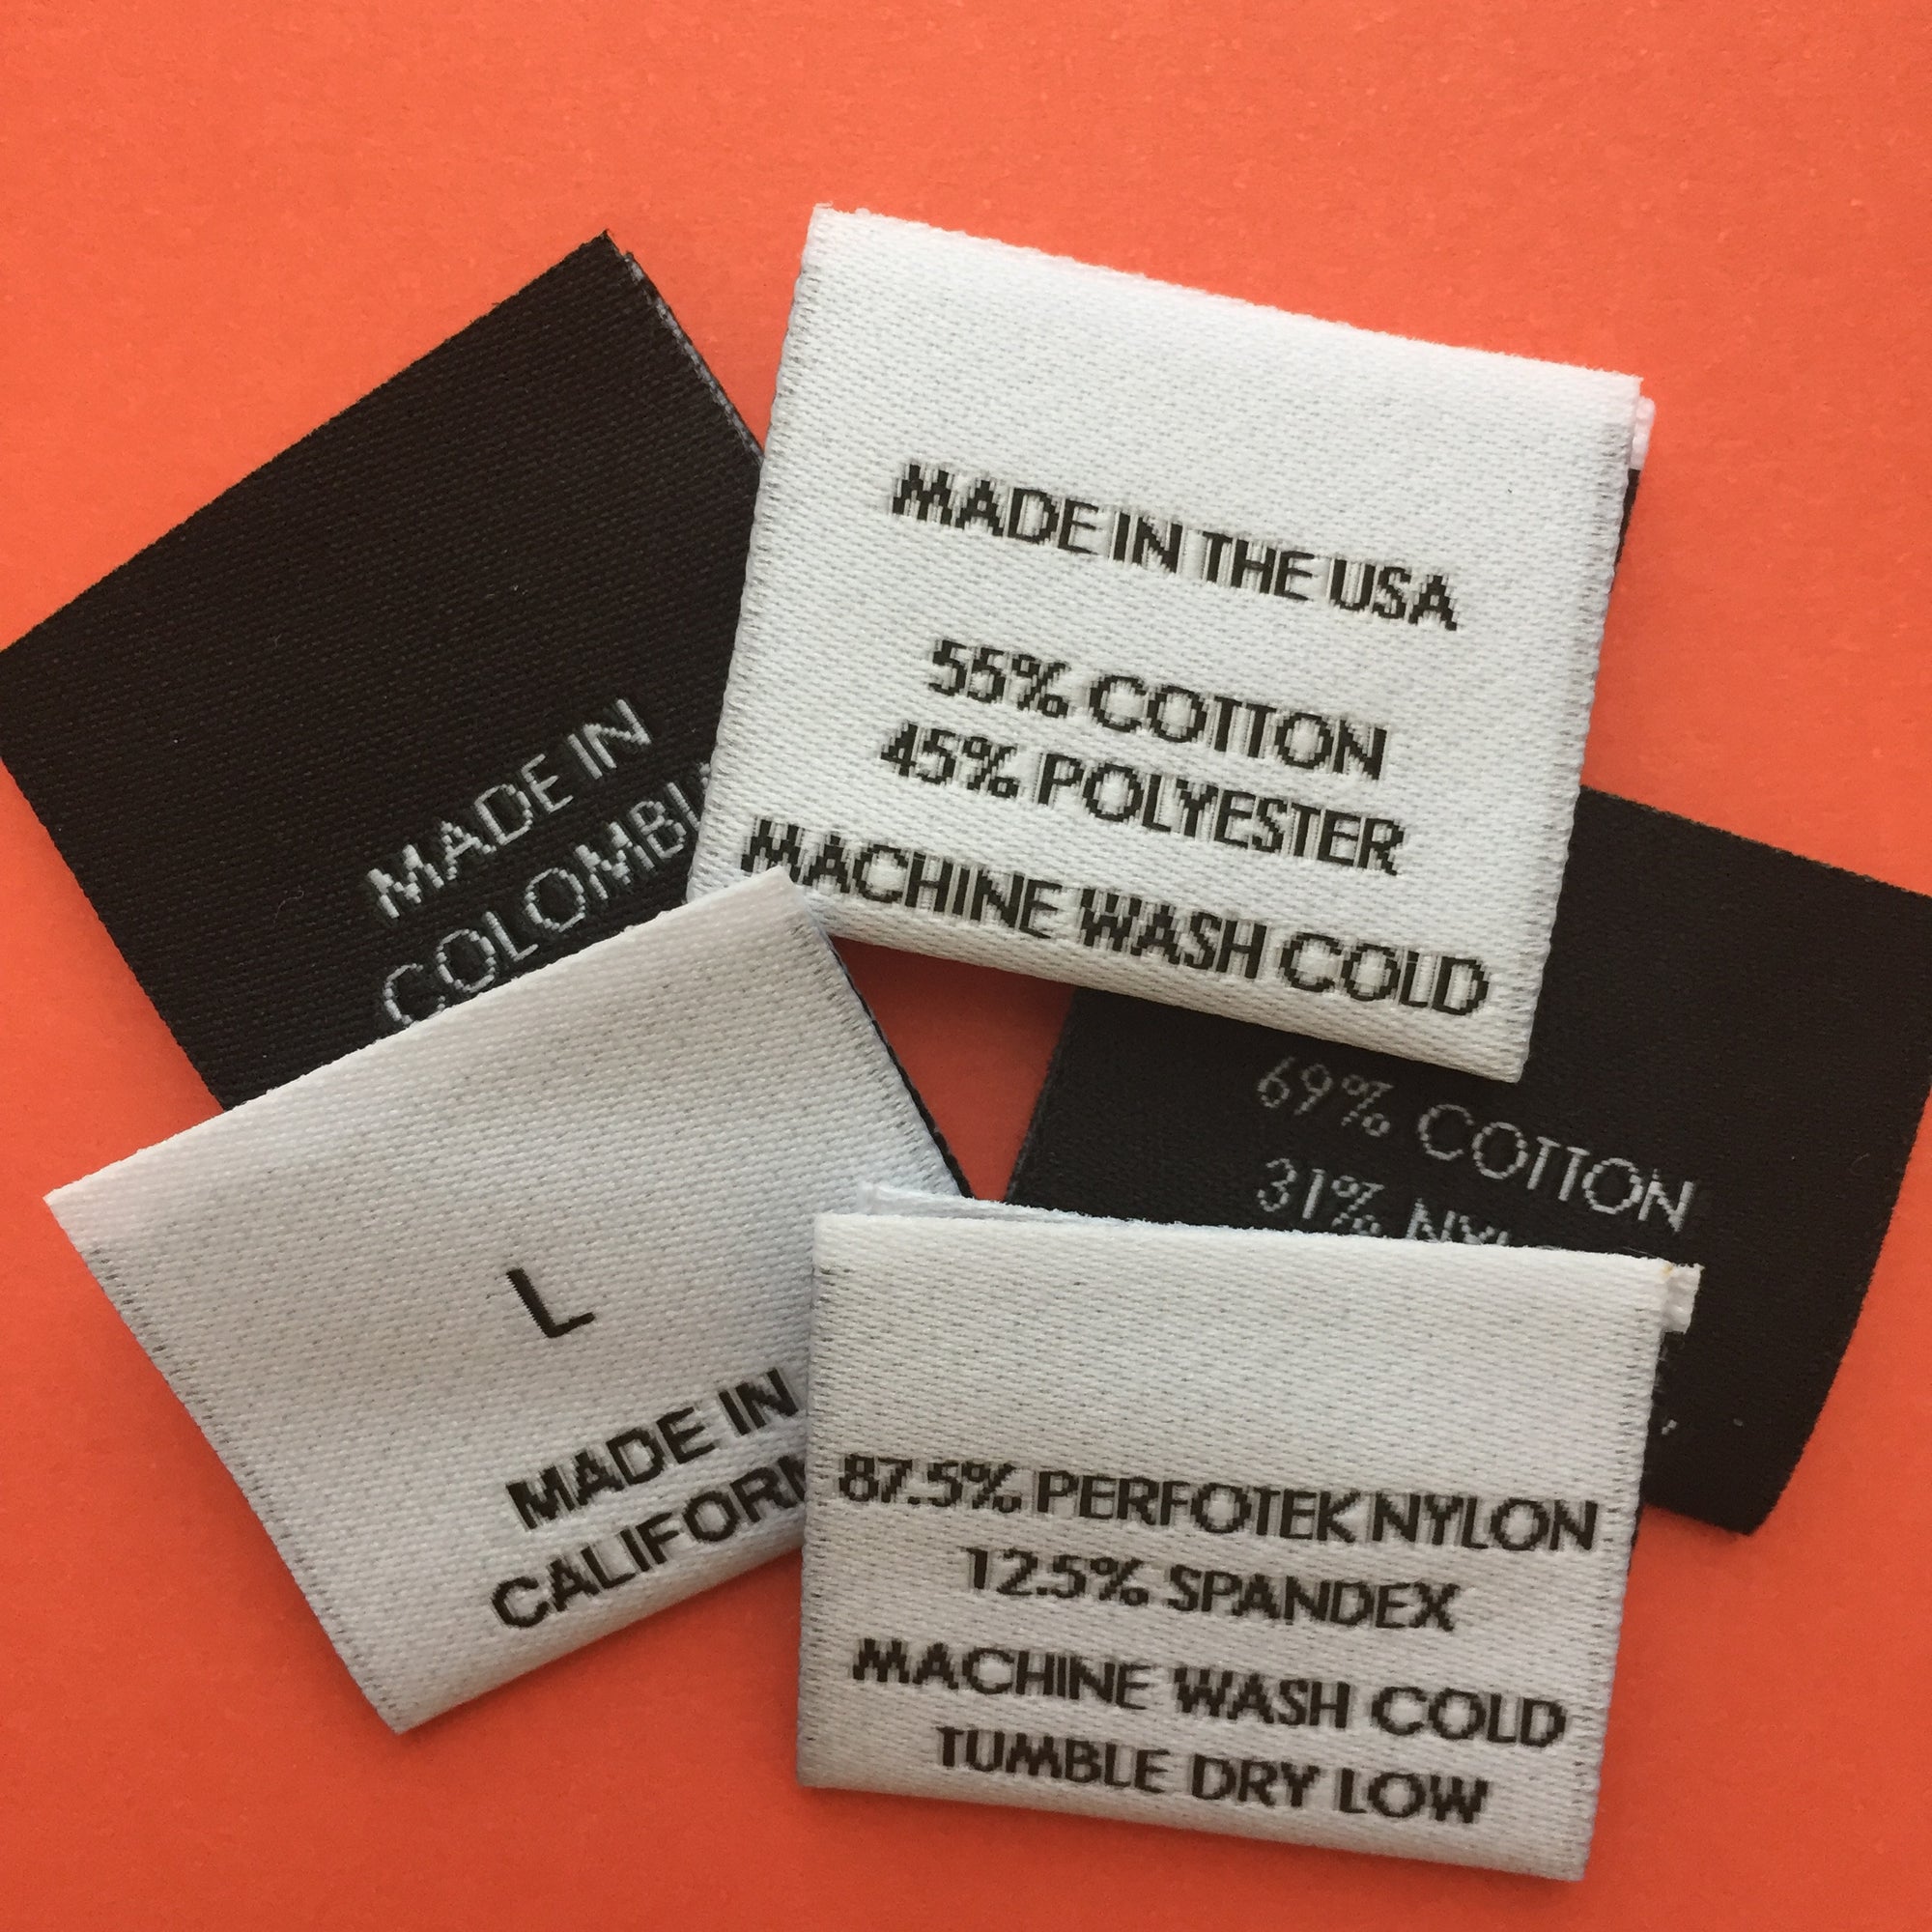 Custom Text Woven Label with Front Only